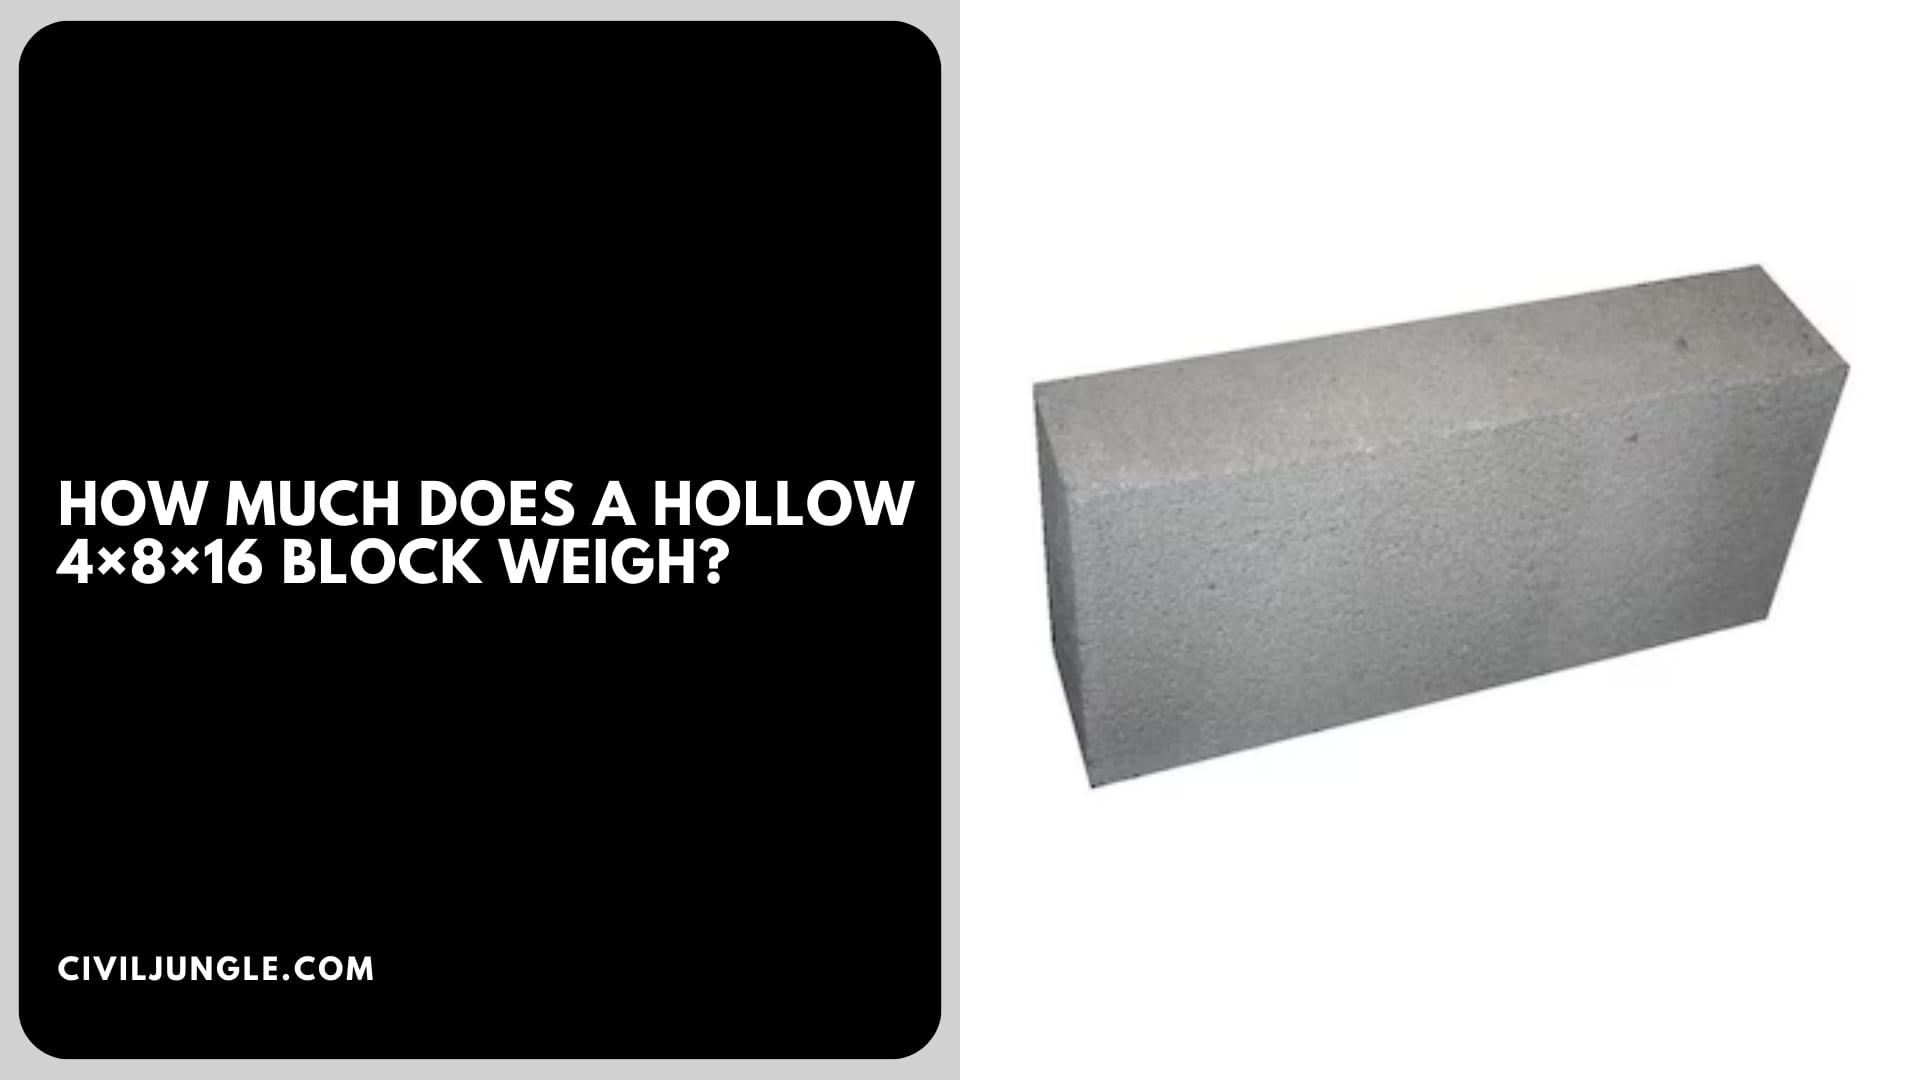 How Much Does a Hollow 4×8×16 Block Weigh?